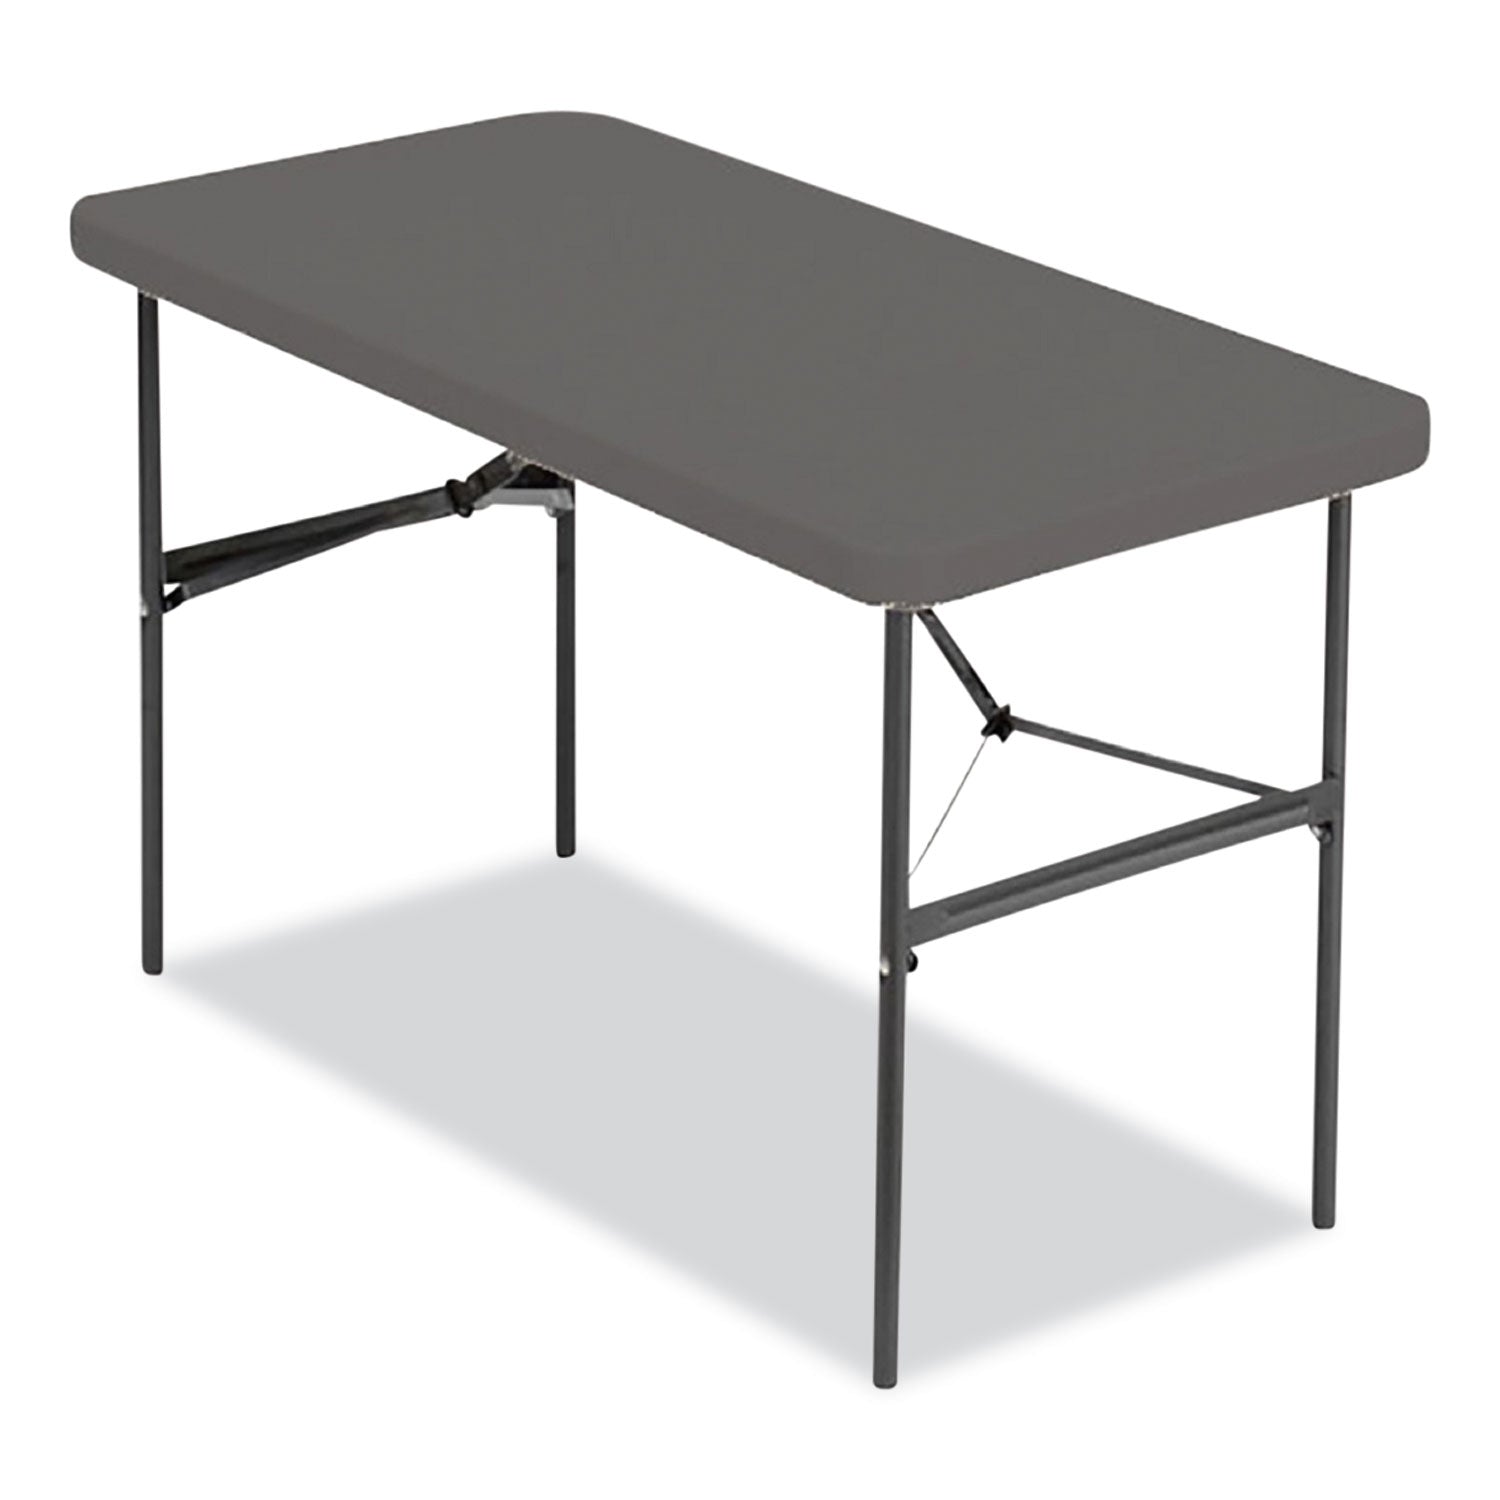 indestructable-commercial-folding-table-rectangular-48-x-24-x-29-charcoal-top-charcoal-base-legs_ice65507 - 1